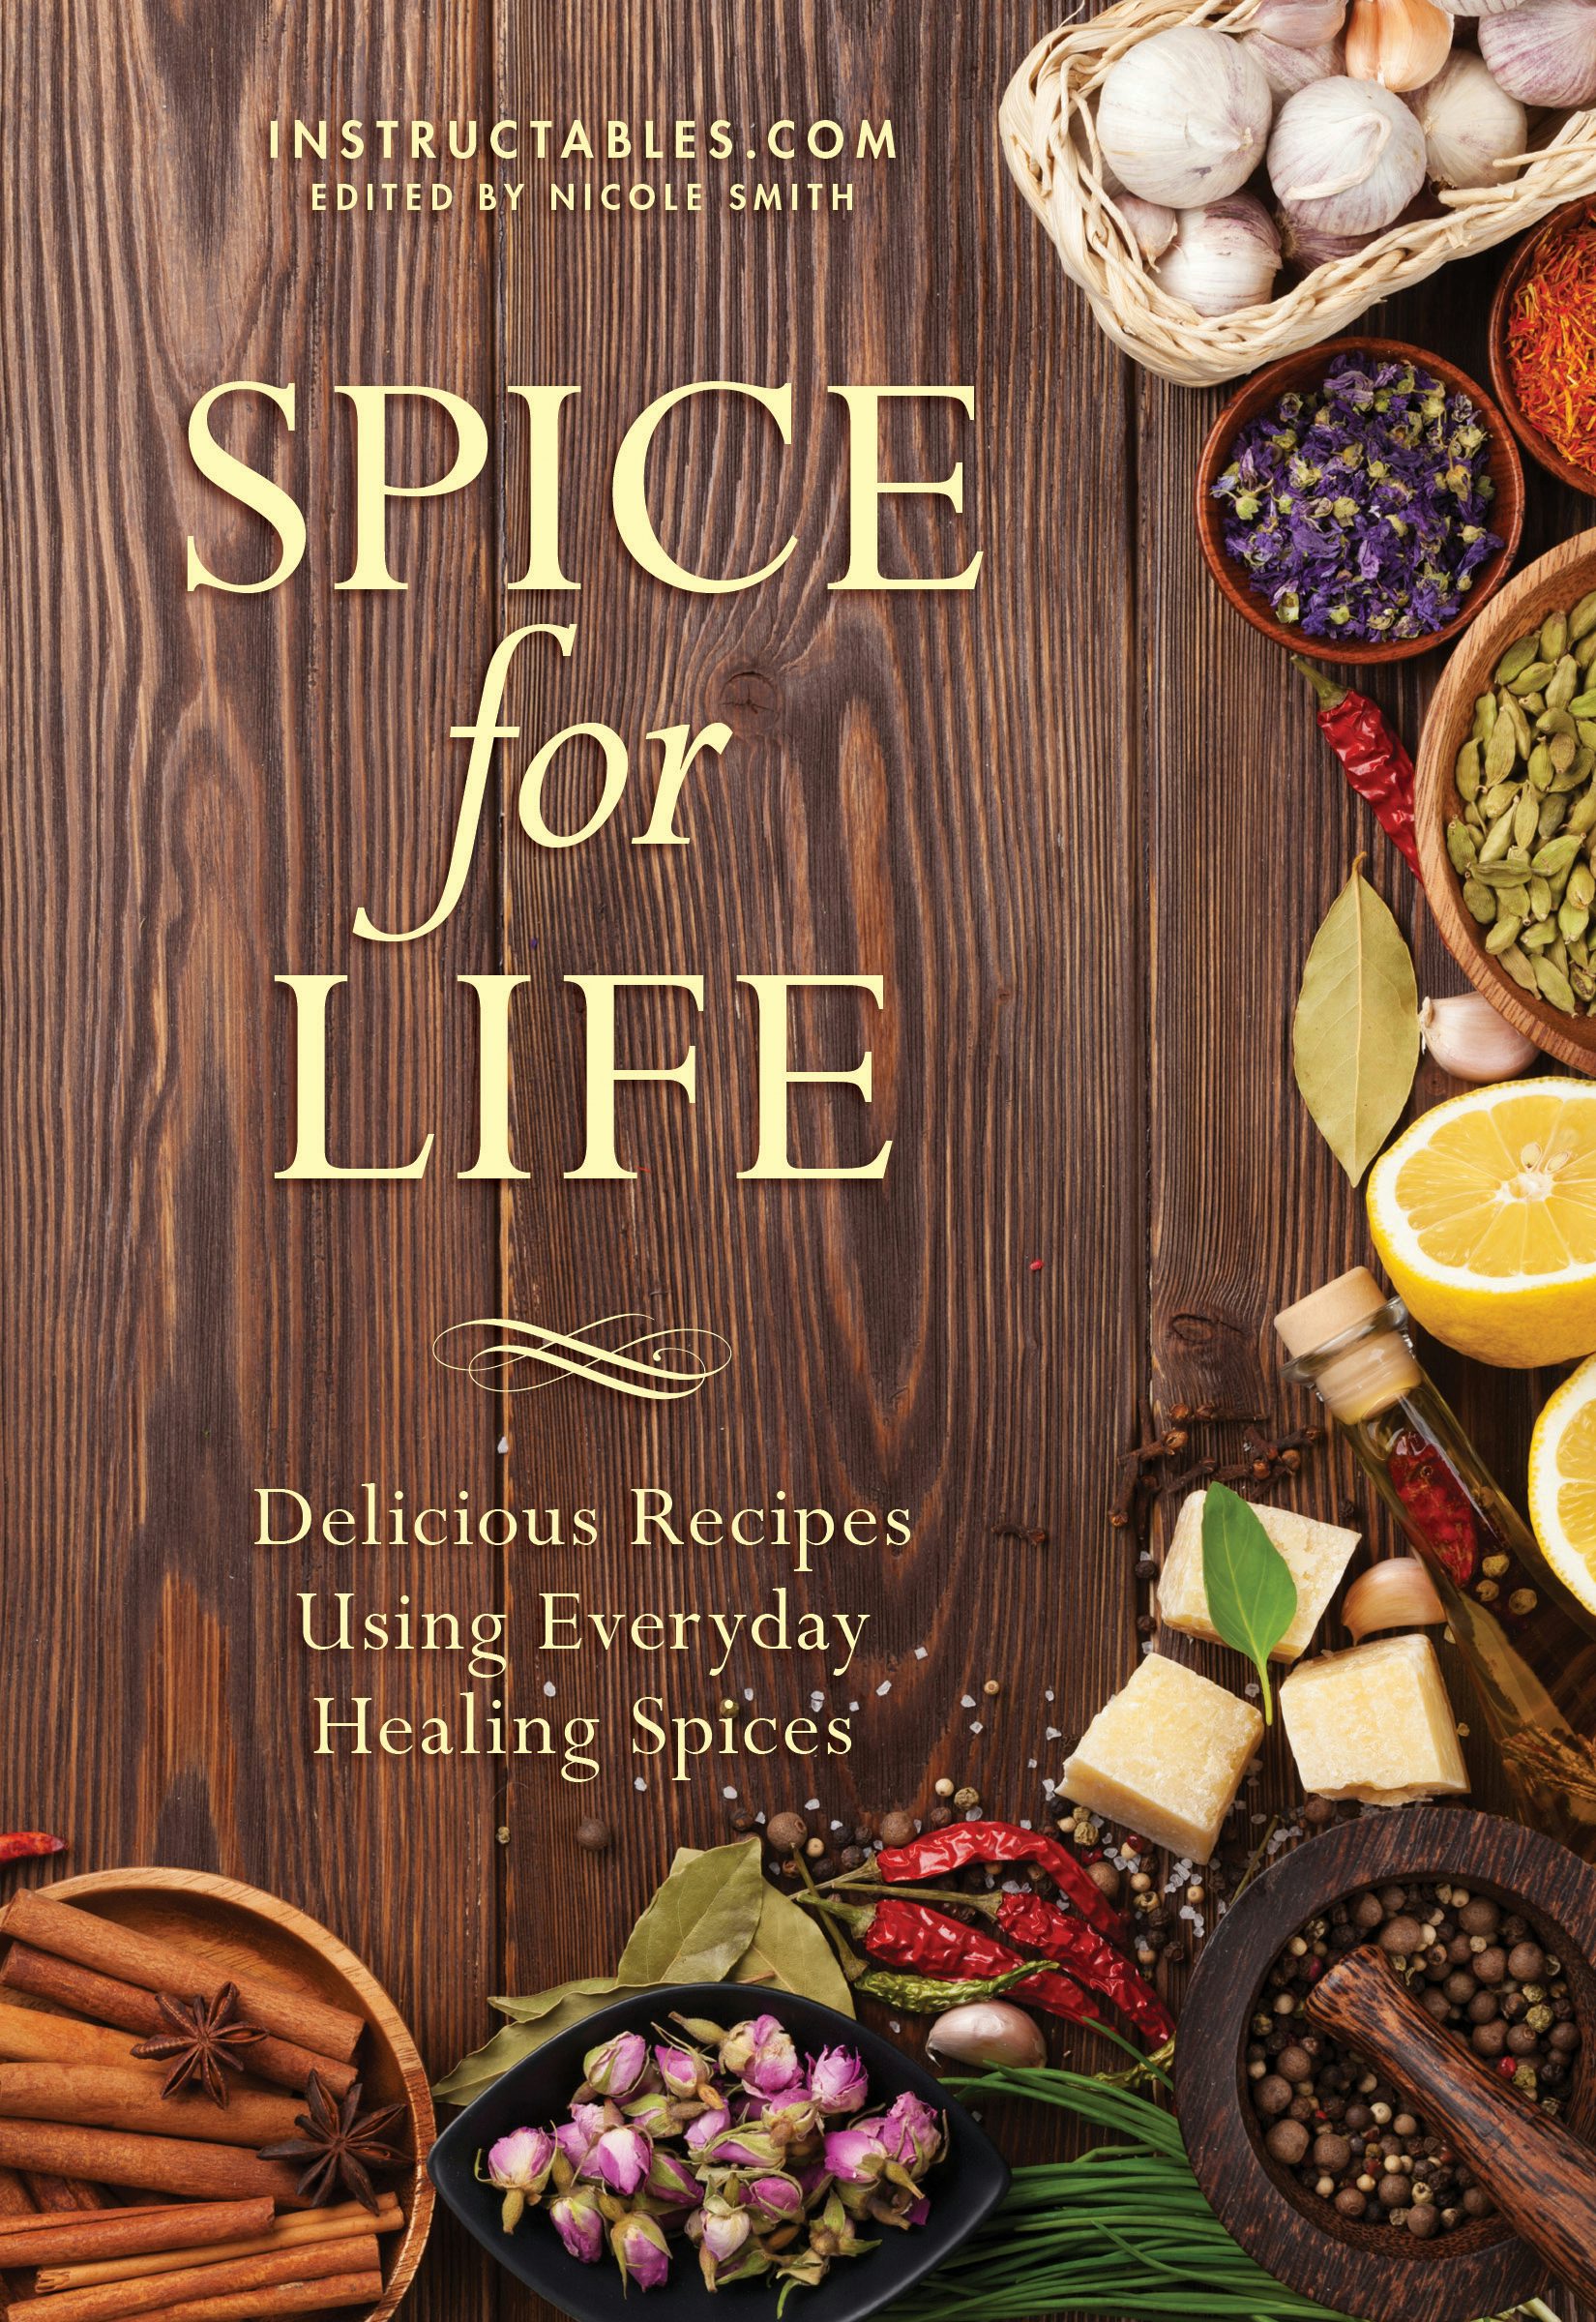 The Spice of Life by Jake Furie Lapin